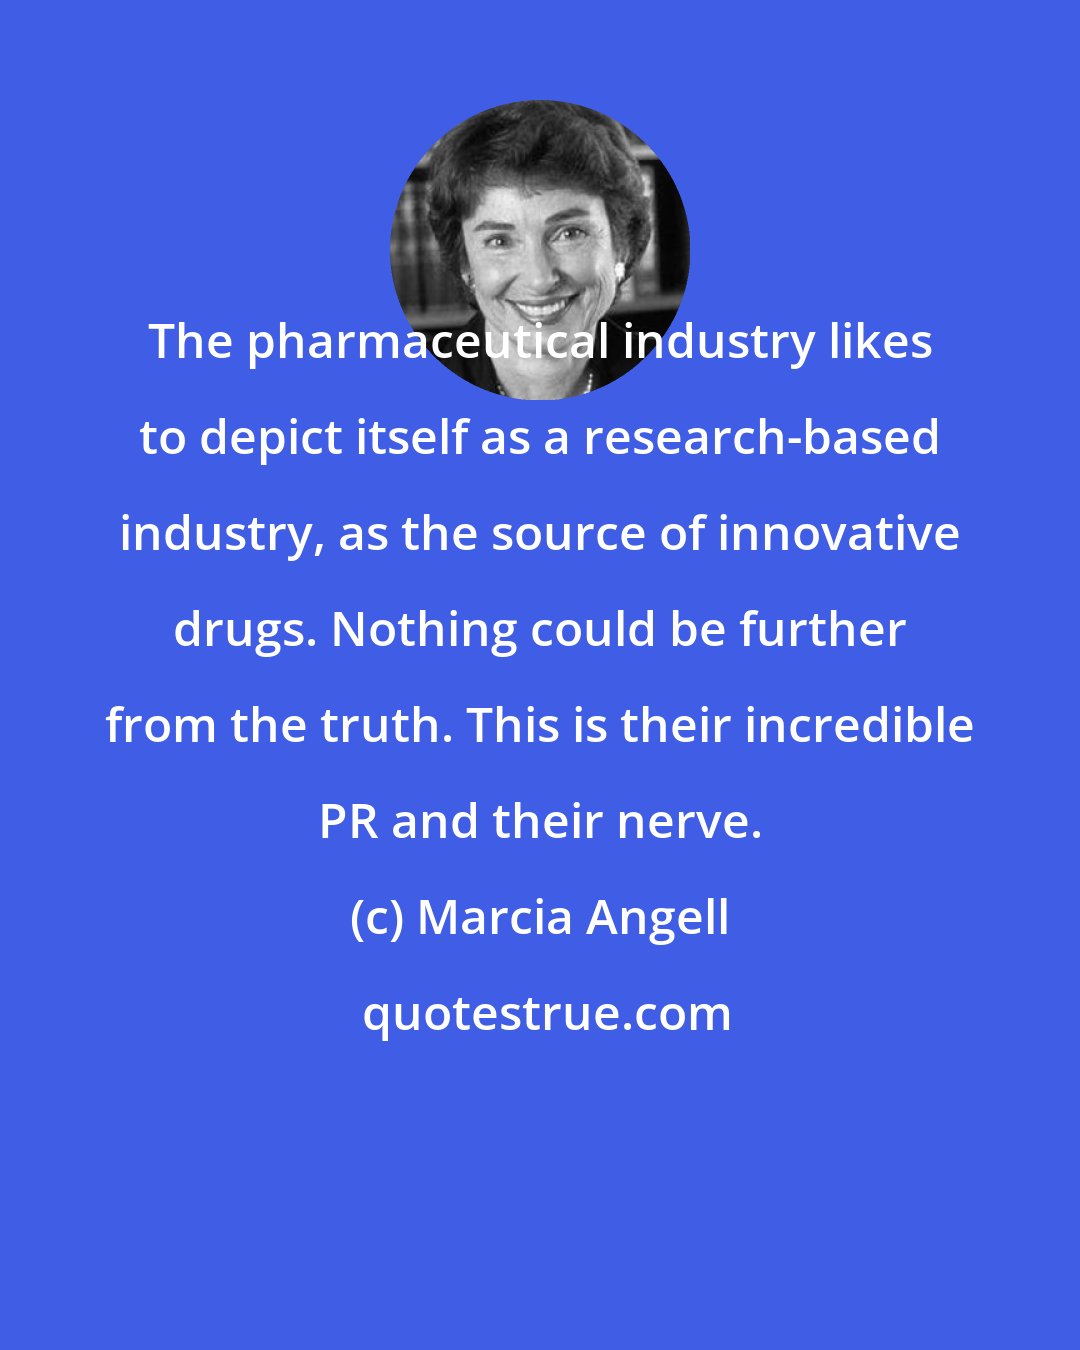 Marcia Angell: The pharmaceutical industry likes to depict itself as a research-based industry, as the source of innovative drugs. Nothing could be further from the truth. This is their incredible PR and their nerve.